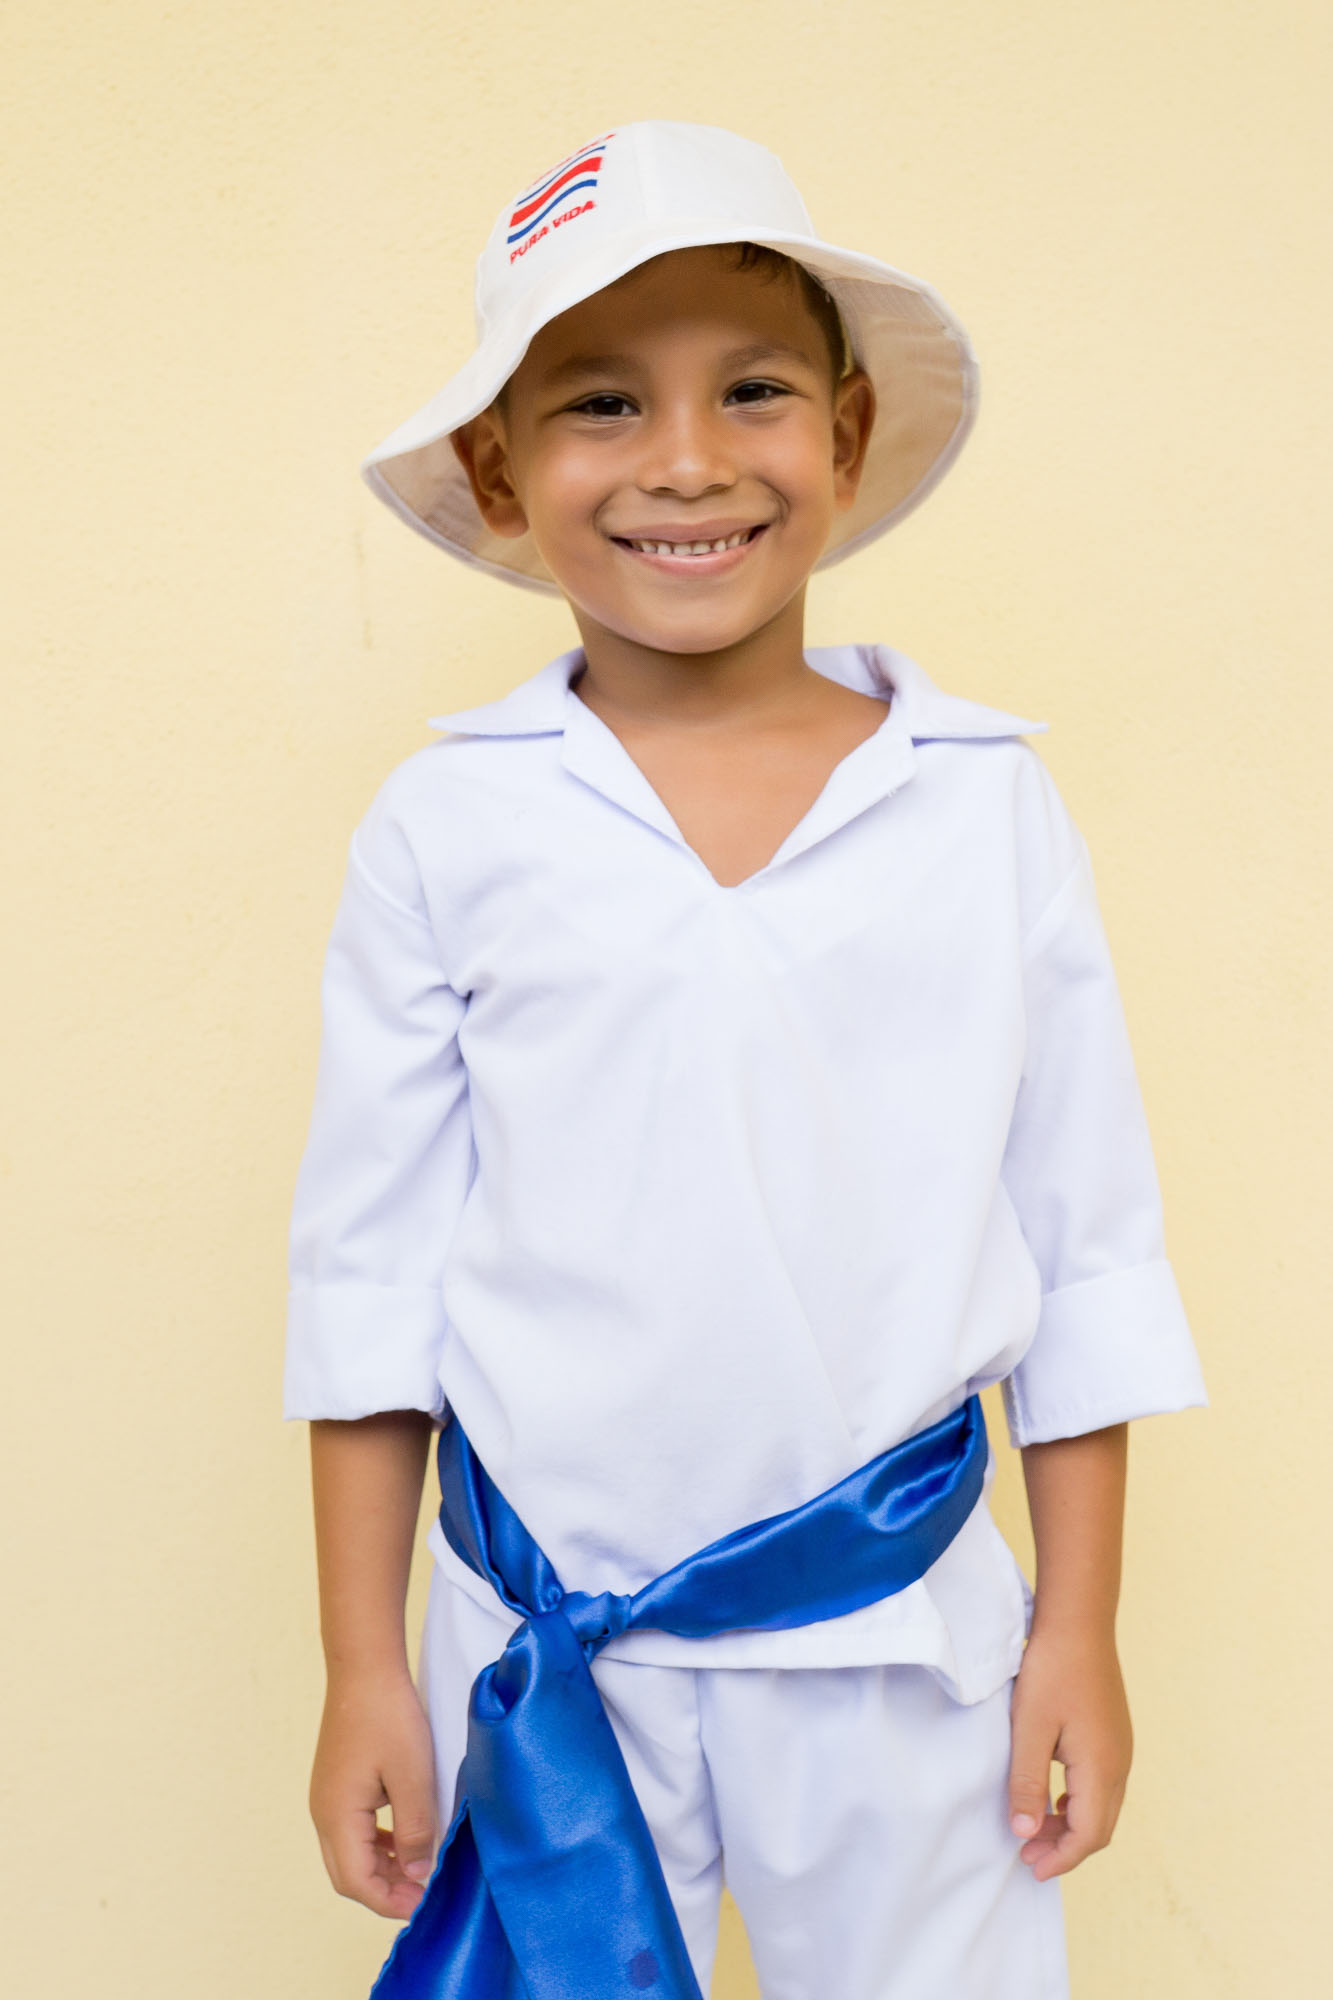 Little boy in campesino outfit (traditional Costa Rican clothing)